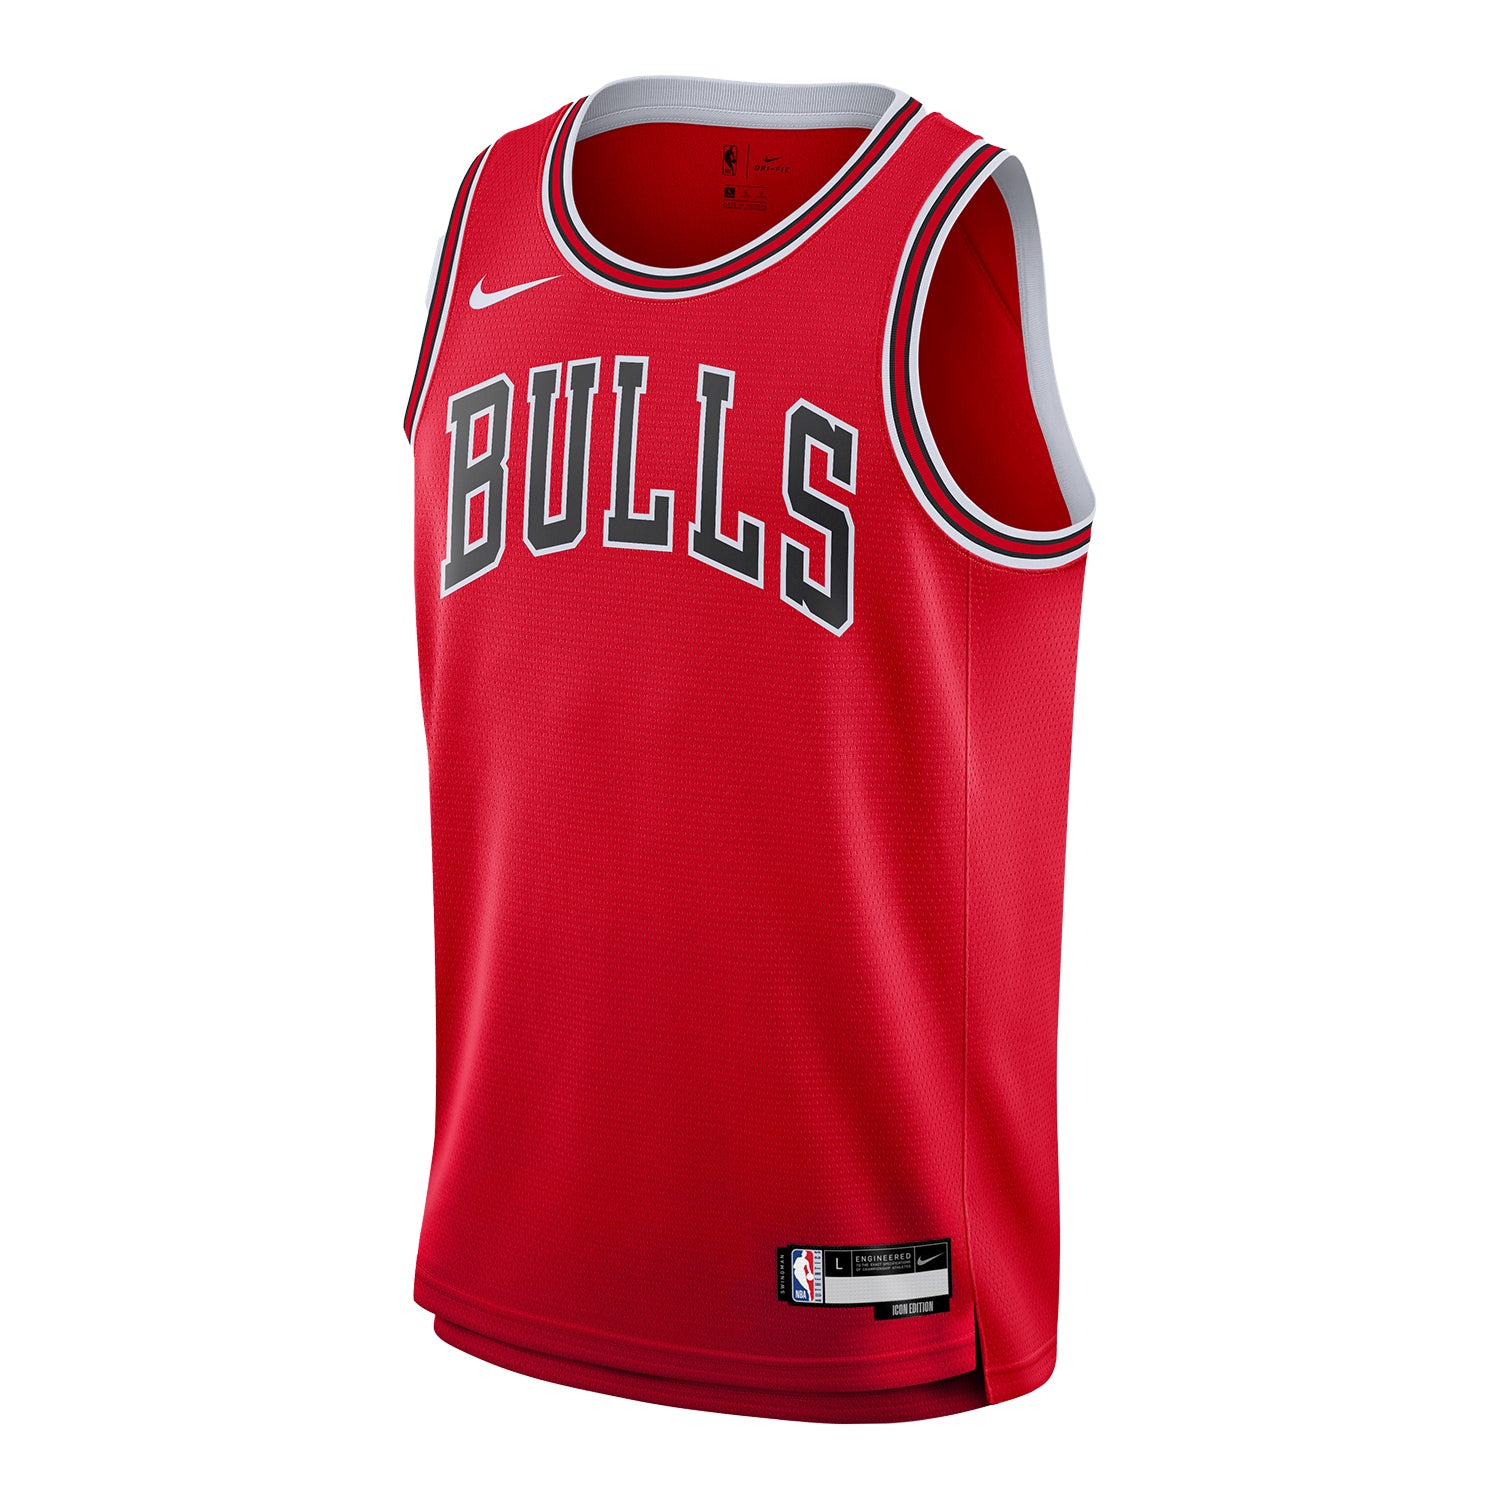 Chicago Bulls Youth Personalized Nike Icon Swingman Jersey - red (front view)